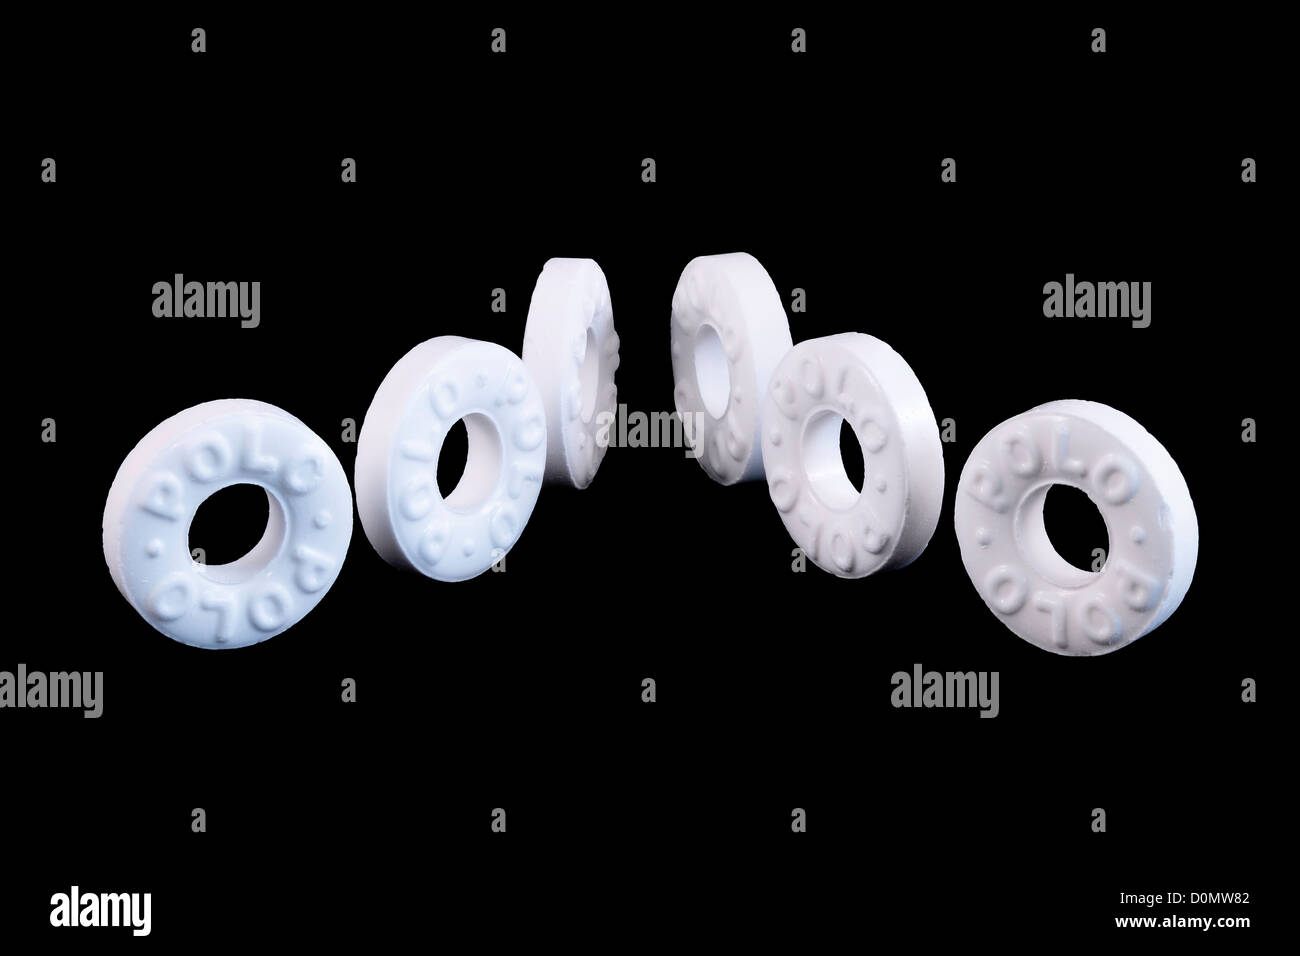 Polo Mints Isolated on Black Background Stock Photo